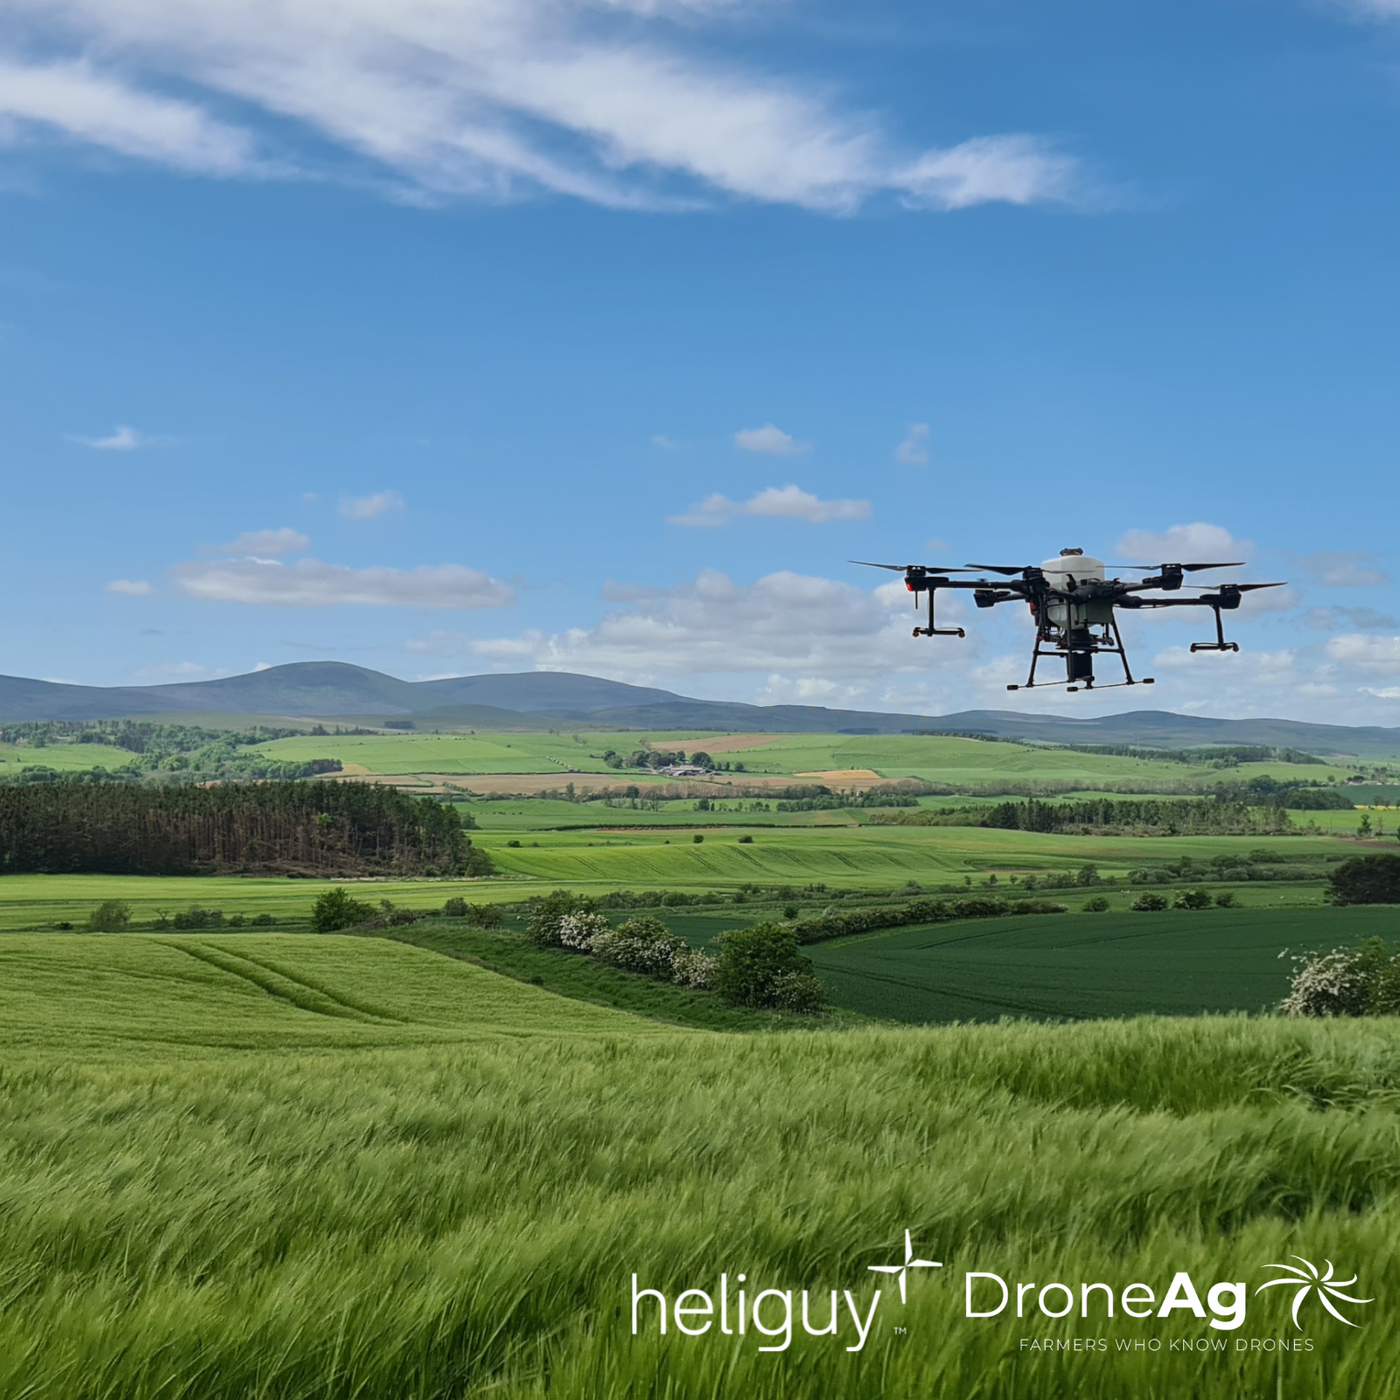 Heliguy partners with Drone Ag to offer crop scouting app and DJI Agras drone spraying training